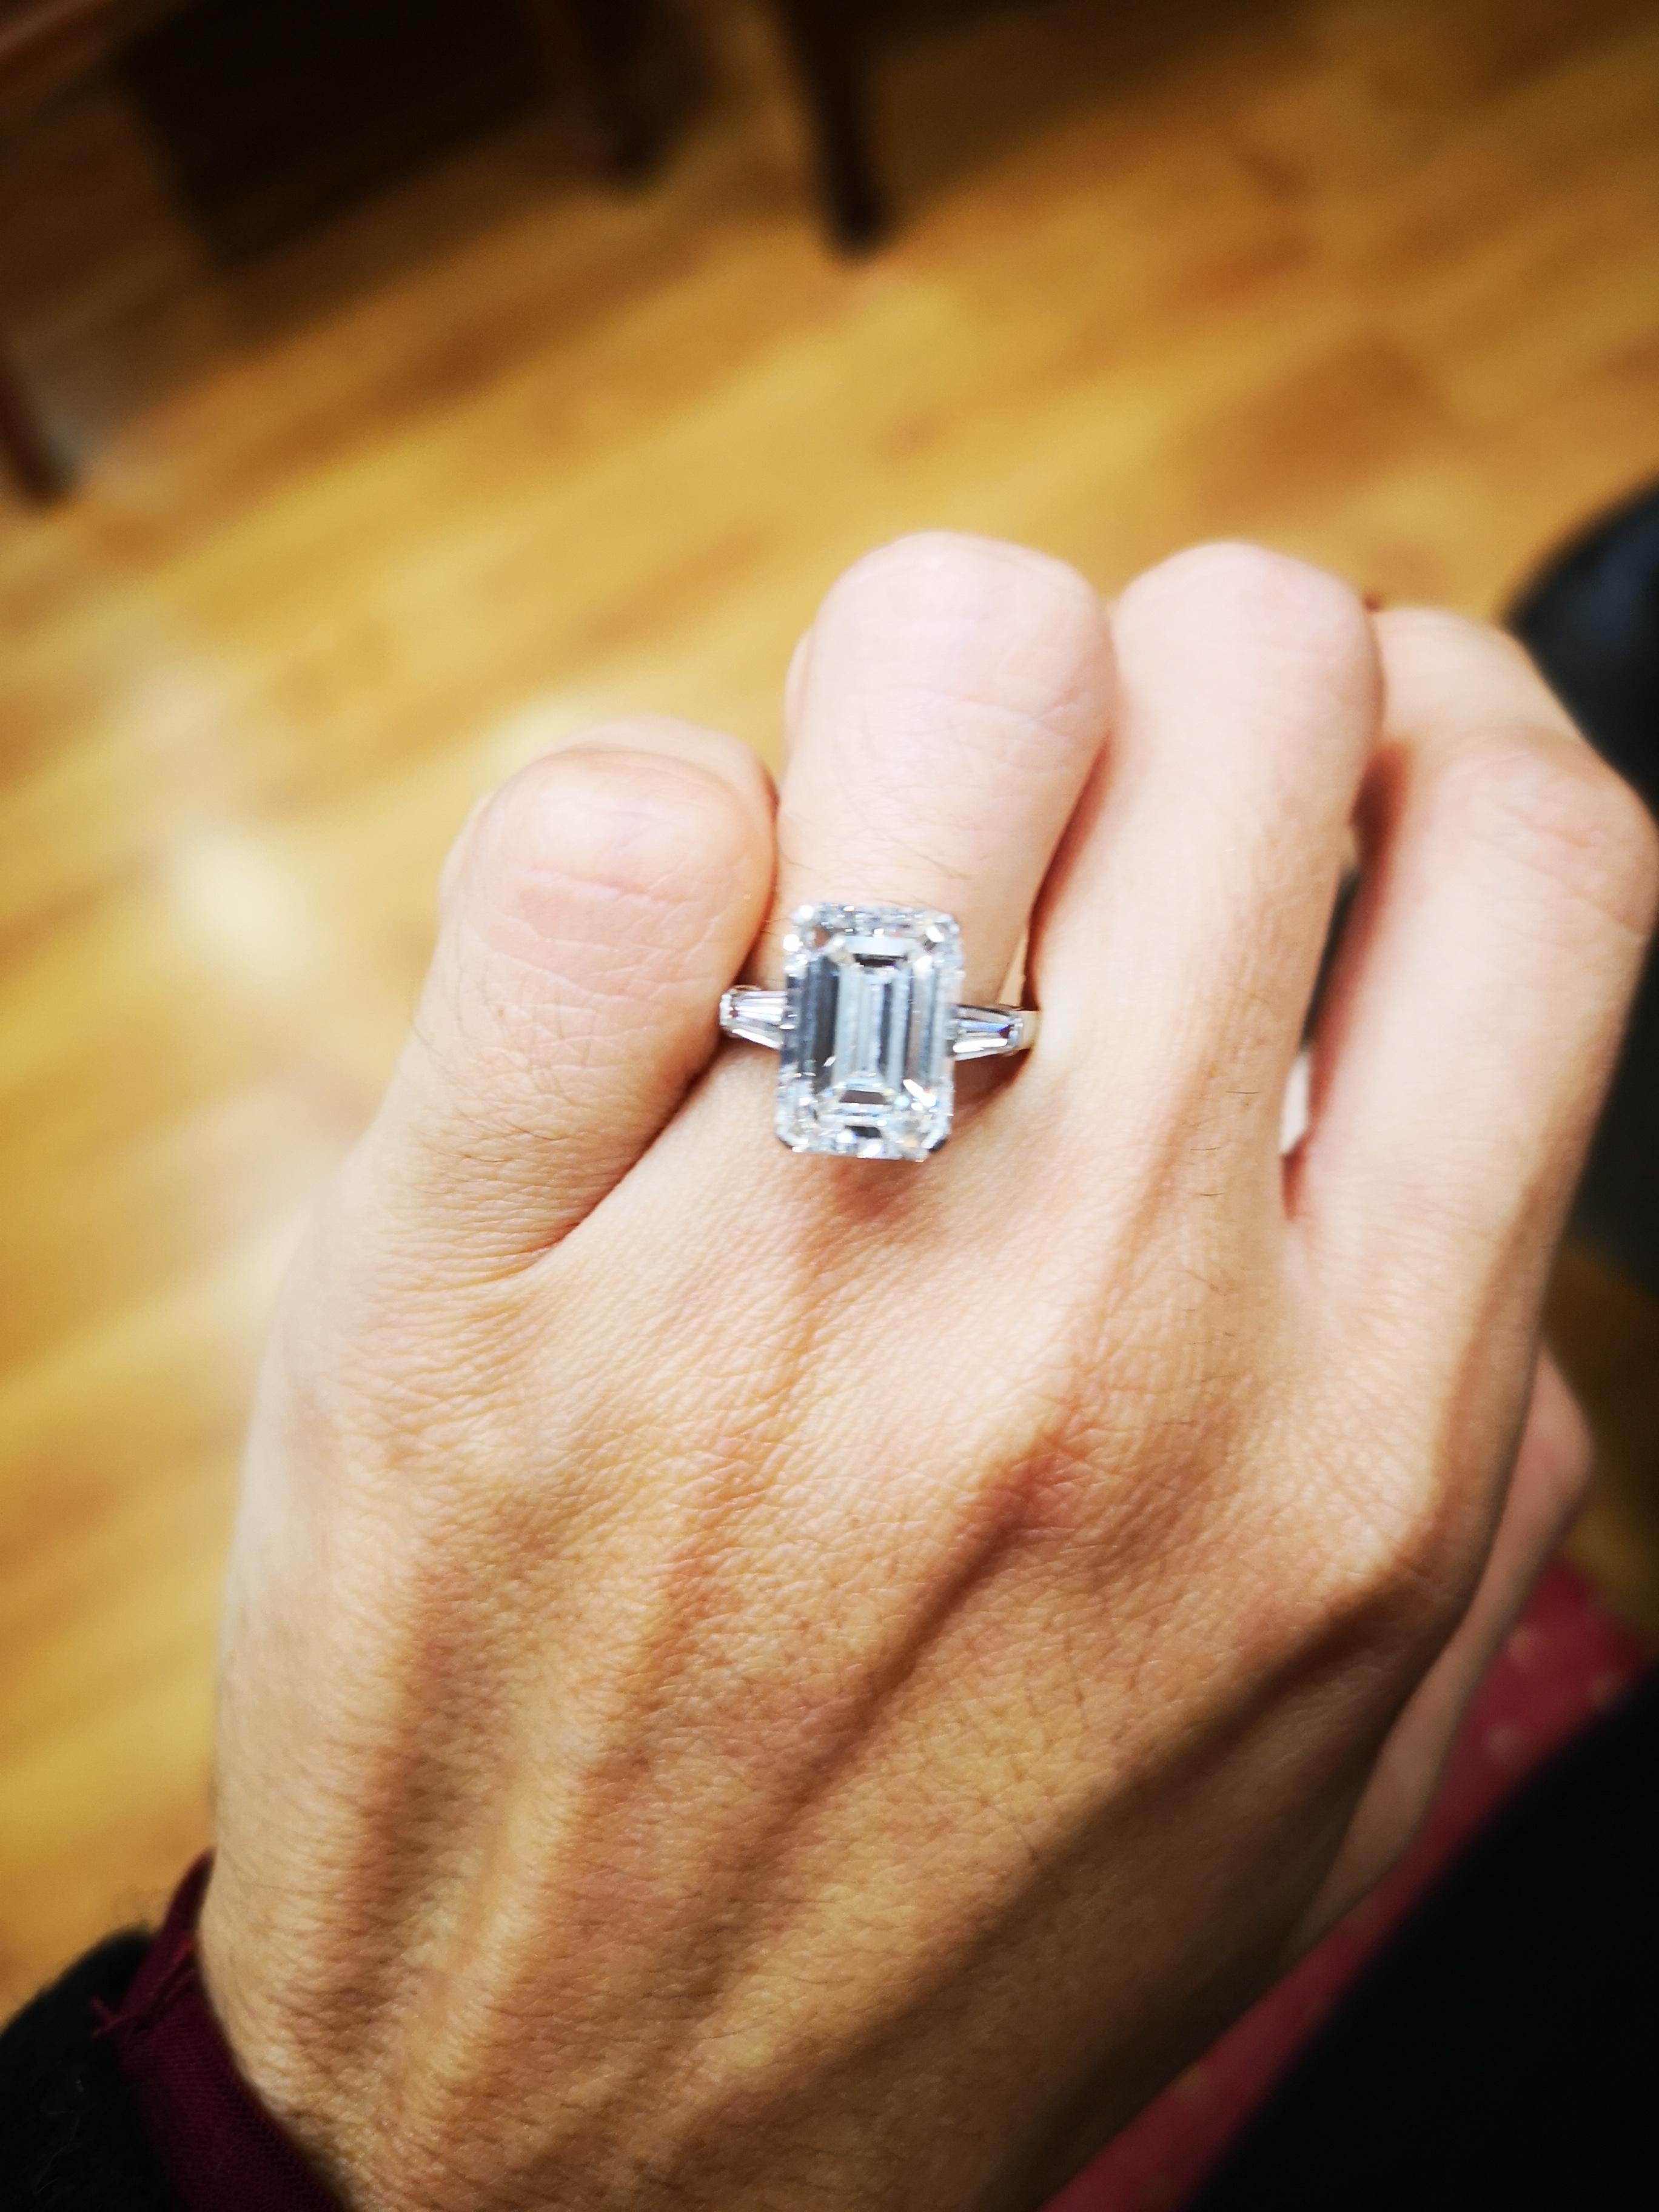 Superb 4 Carat Emerald Cut Engagement Ring


The main stone is a 4 carat diamond is extremely white and pure and has excellent symmetry 

